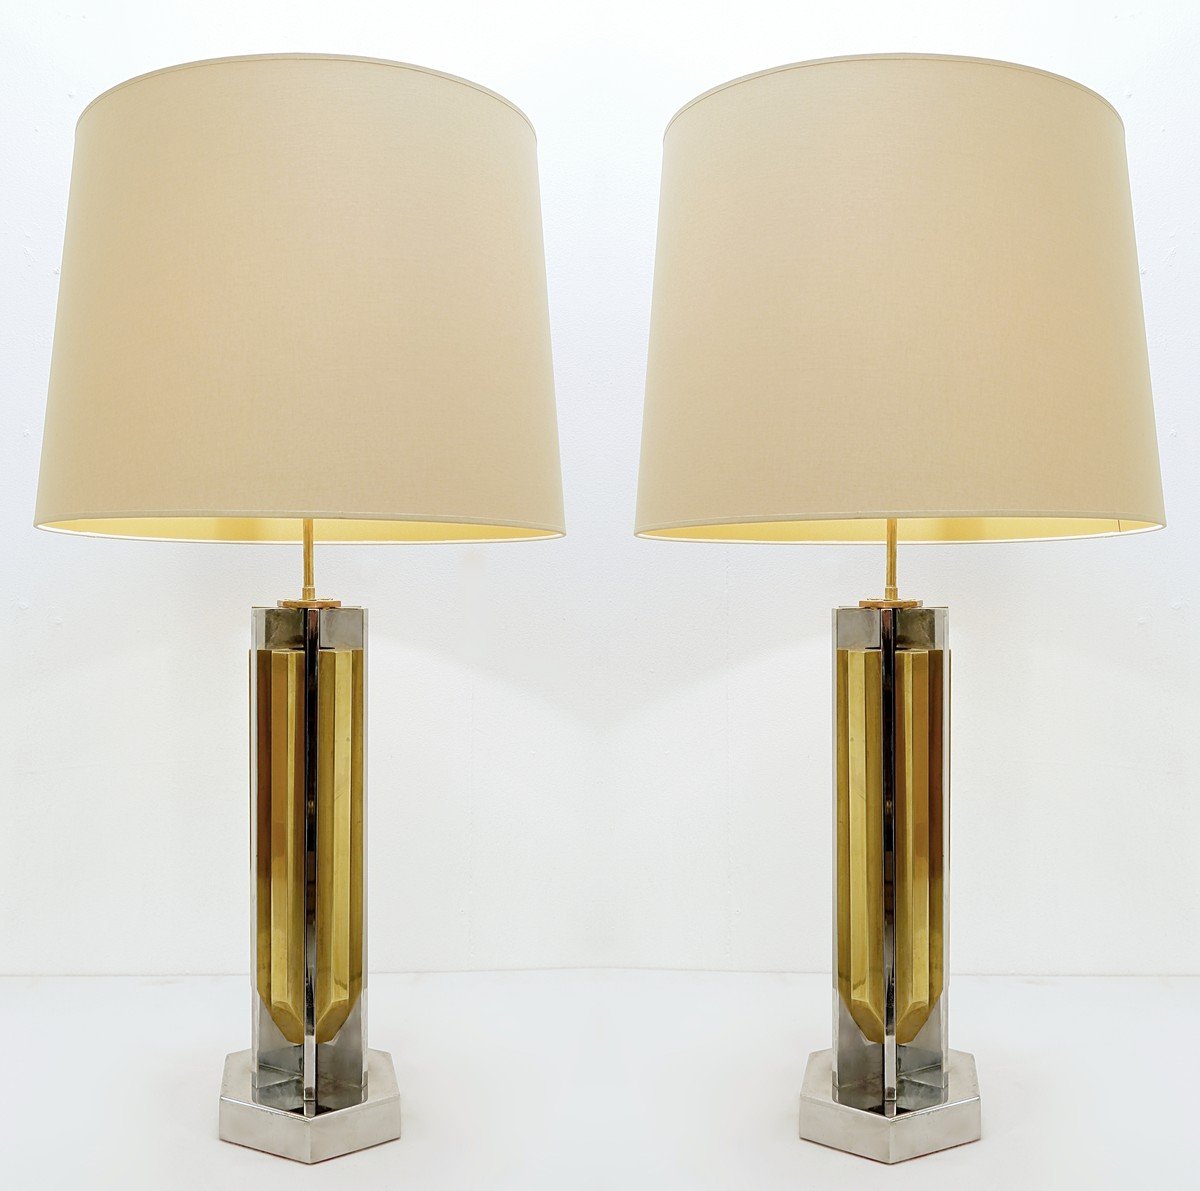 Pair Of Large Chrome And Brass Desk Lamps